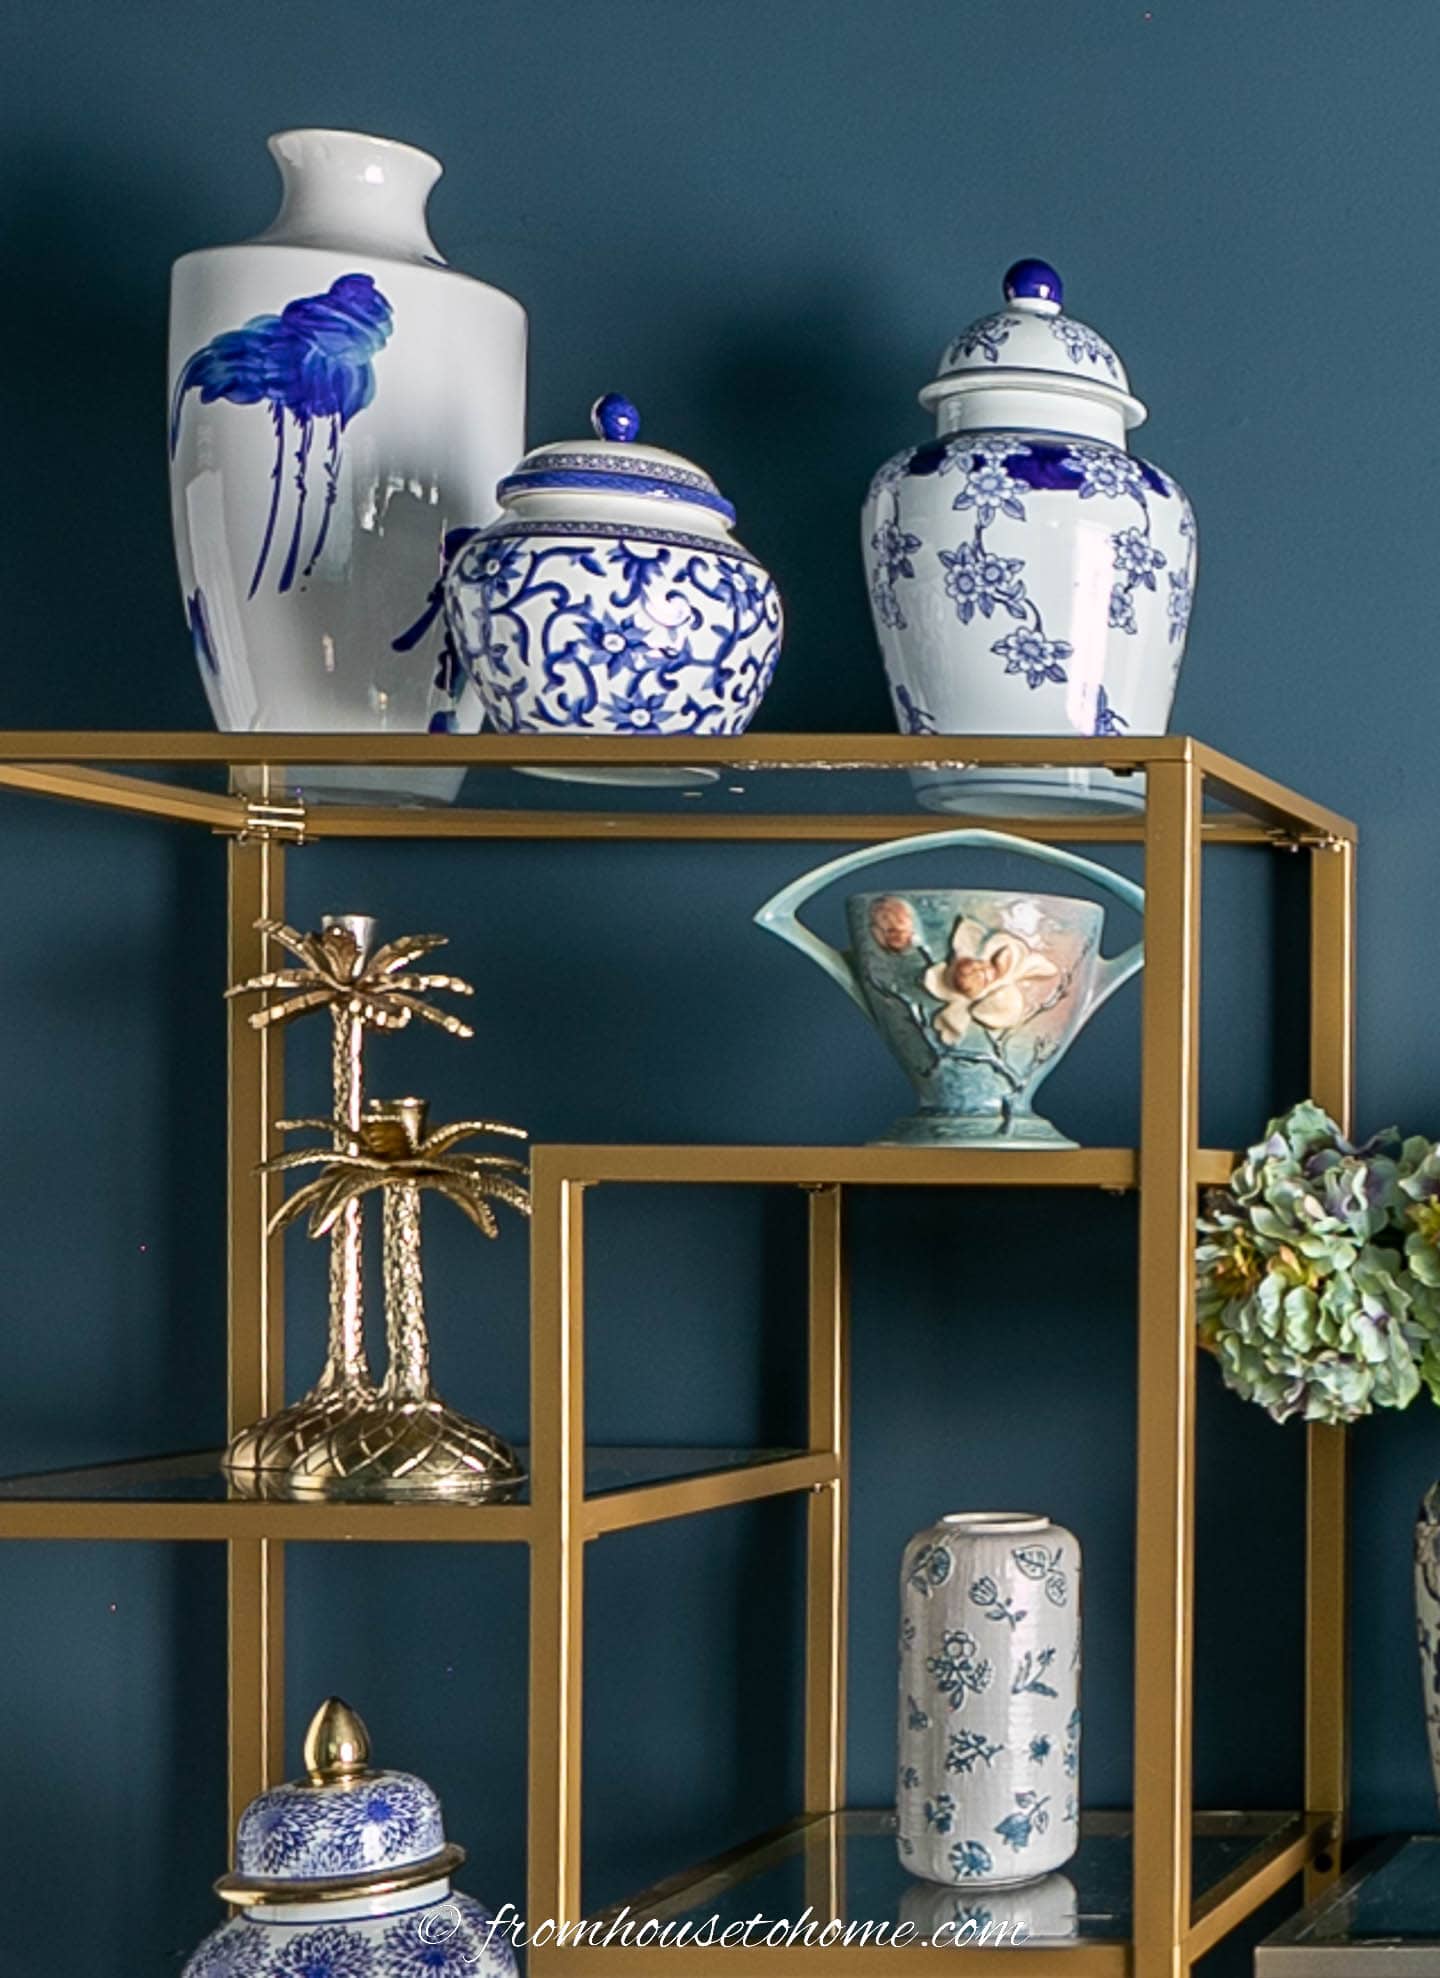 Blue and white Chinoiserie jars on a gold etagere shelf